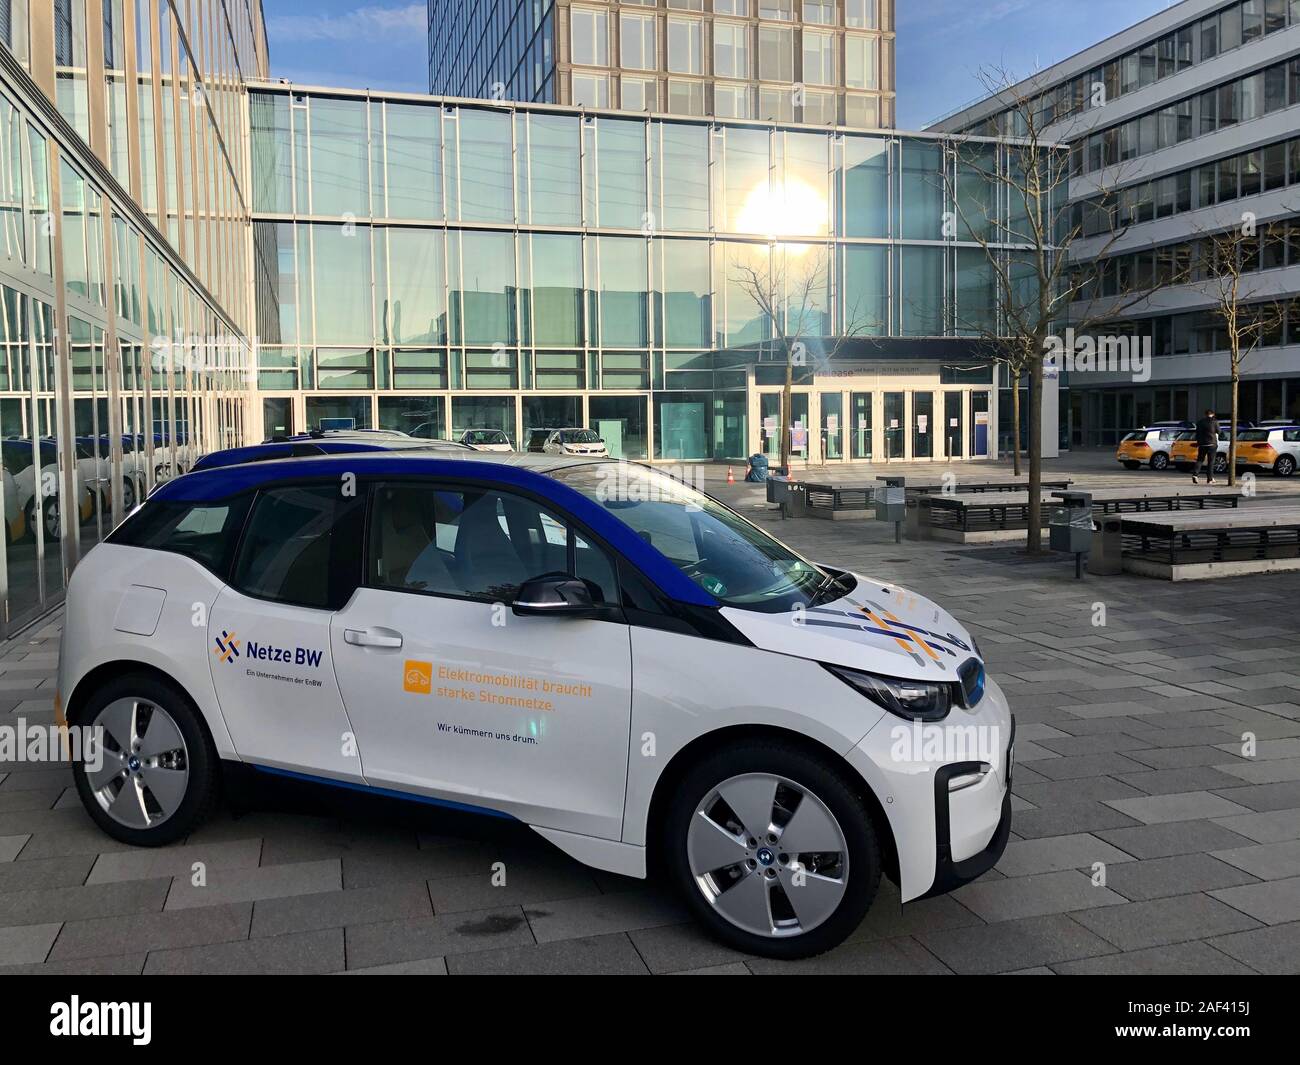 The energy company EnBW (Energie Baden Wuerttemberg) is showcasing its fleet of electric cars on their premises in Stuttgart. Stock Photo